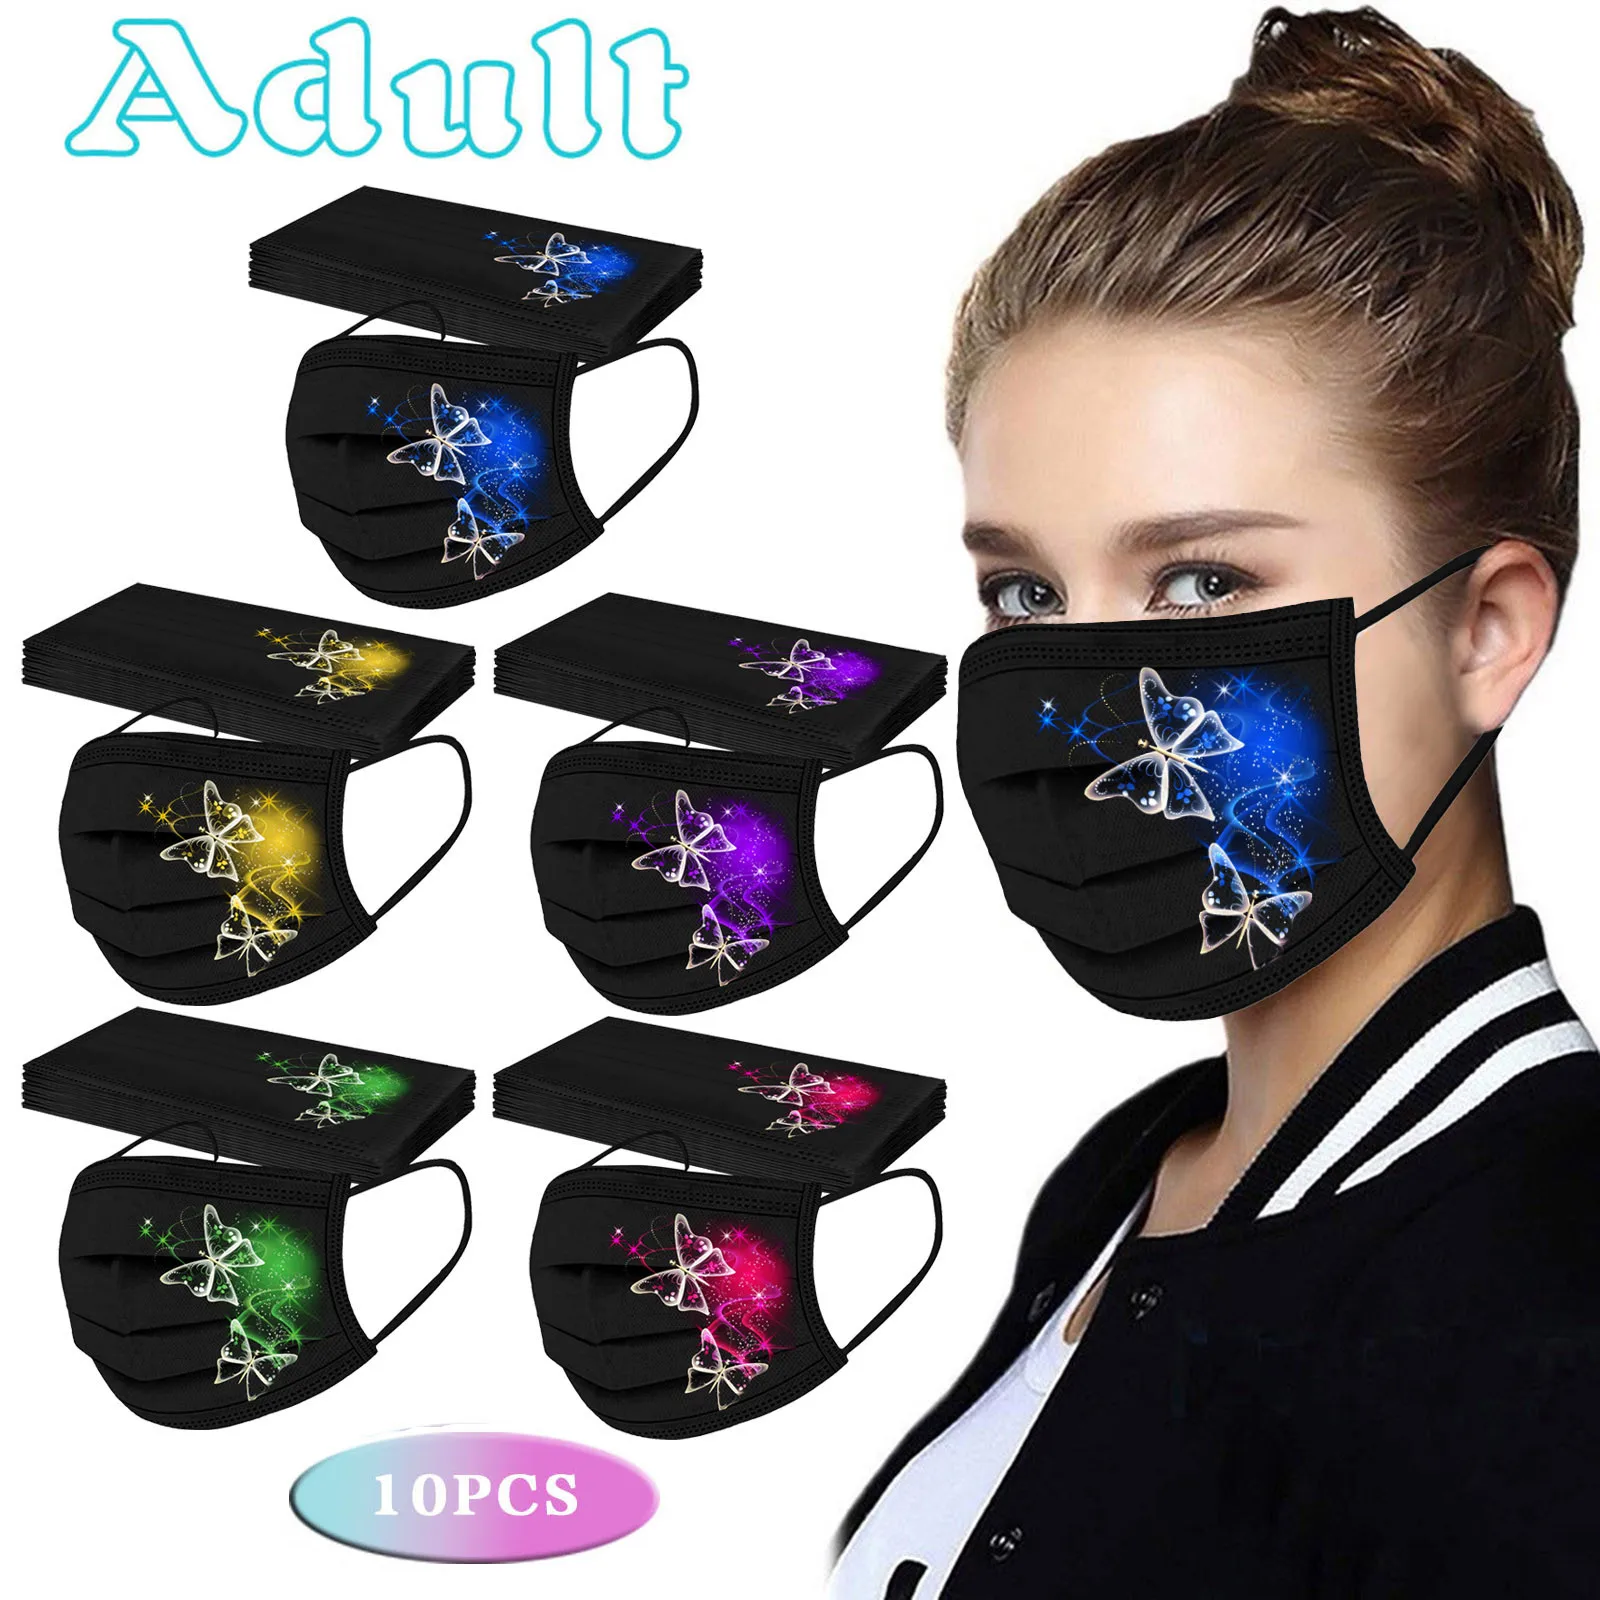 

10PC Adult Fashion Butterfly Print Disposable Face Mask + Nose Strip 3 Layer Meltblown Anti-dust Breathable Mouth Masks masque